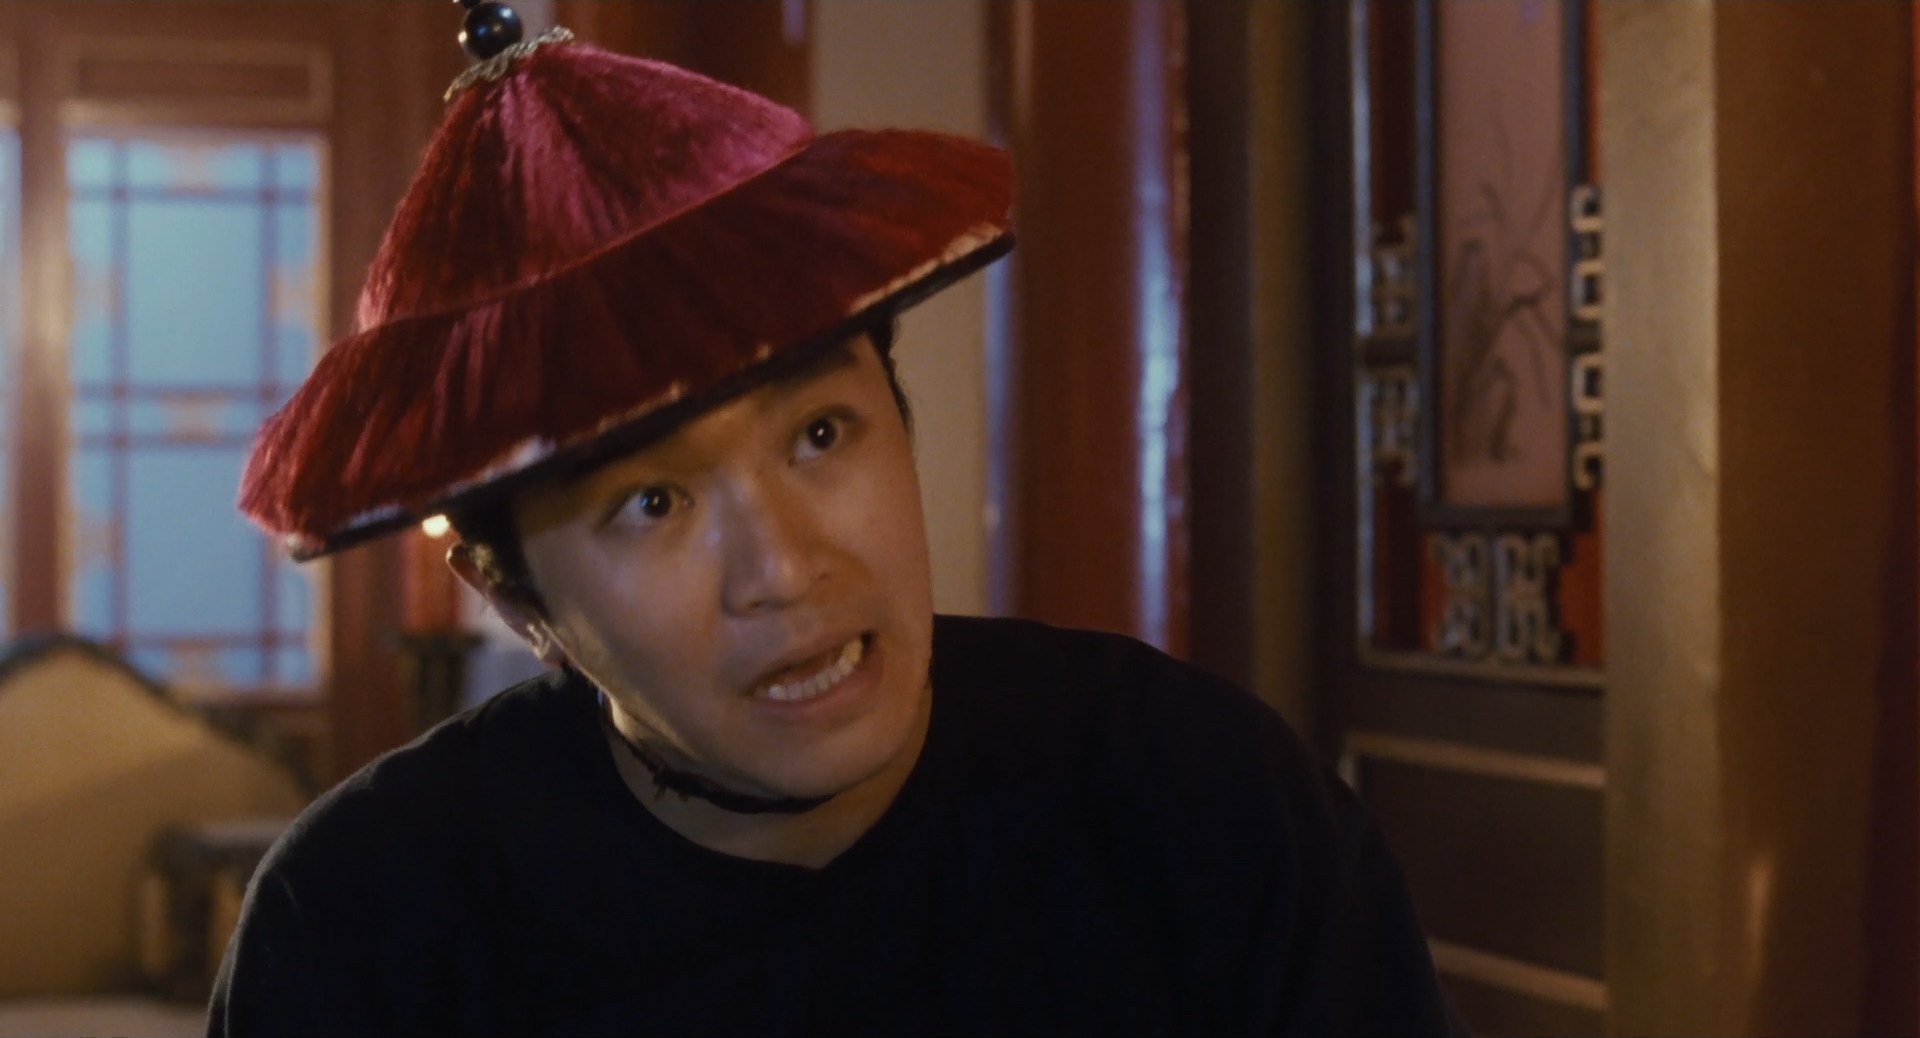 Stephen Chow in a still from “Royal Tramp”. Photo: Eureka Entertainment